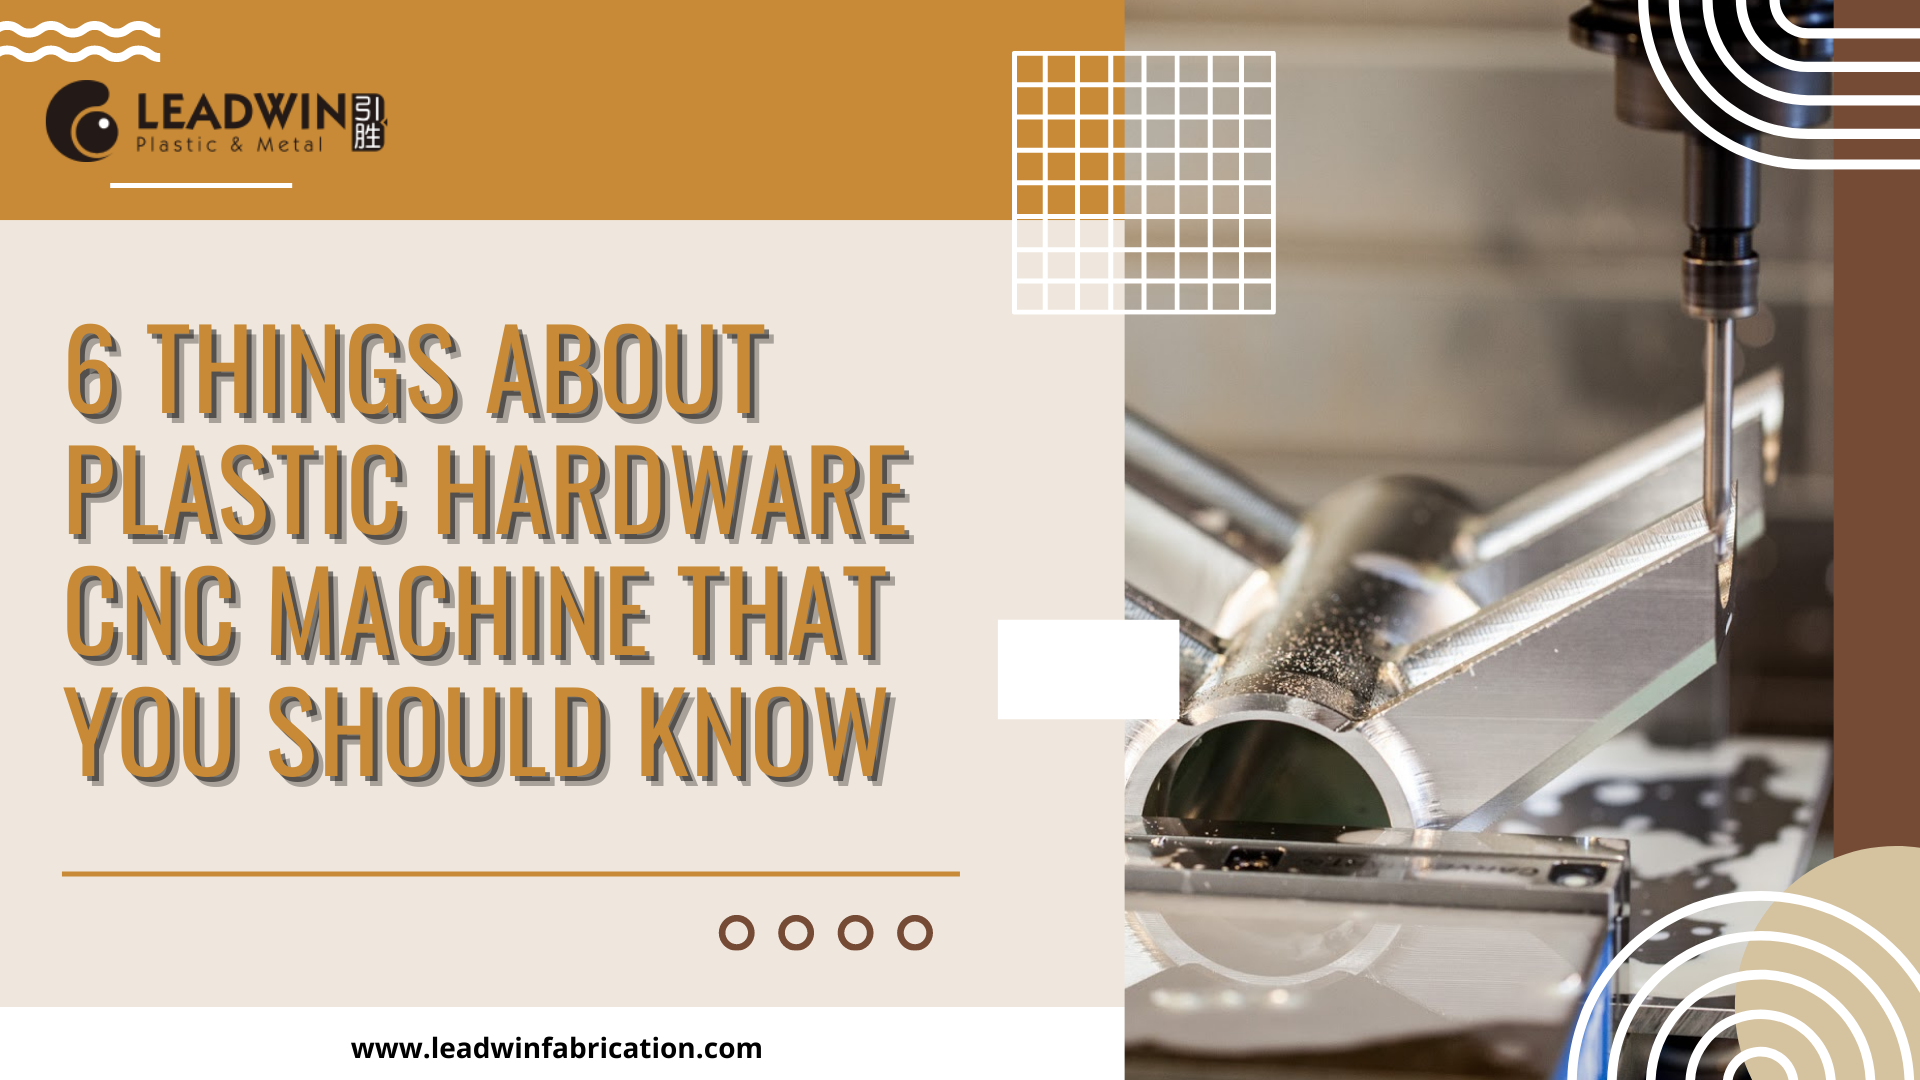 6 Things About Plastic Hardware CNC Machine That You Should Know